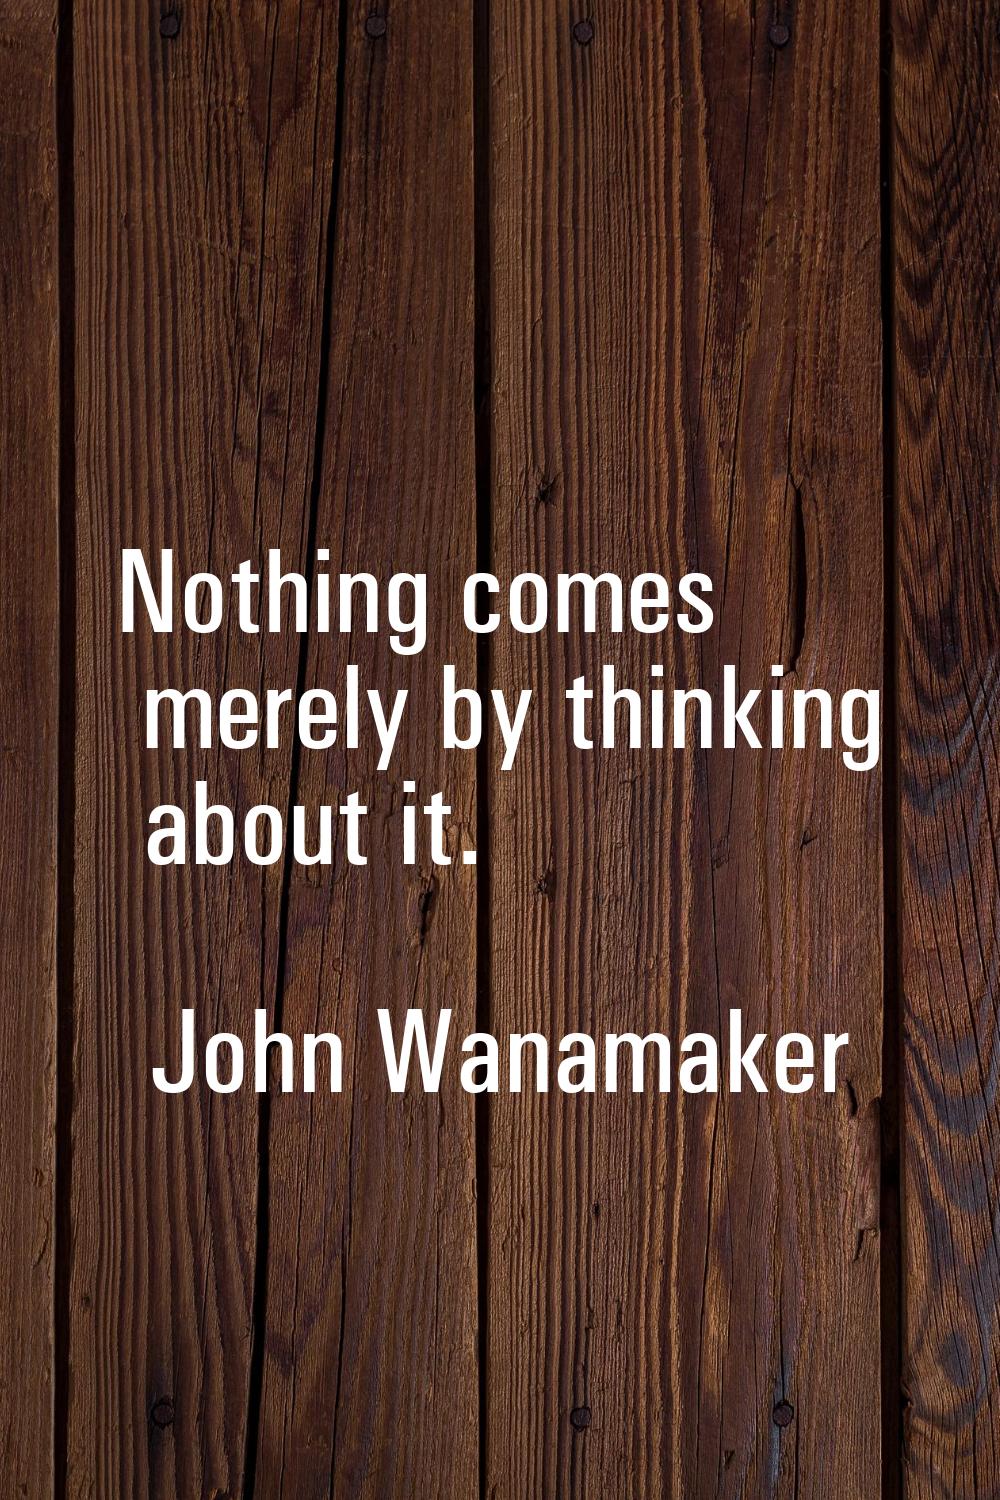 Nothing comes merely by thinking about it.